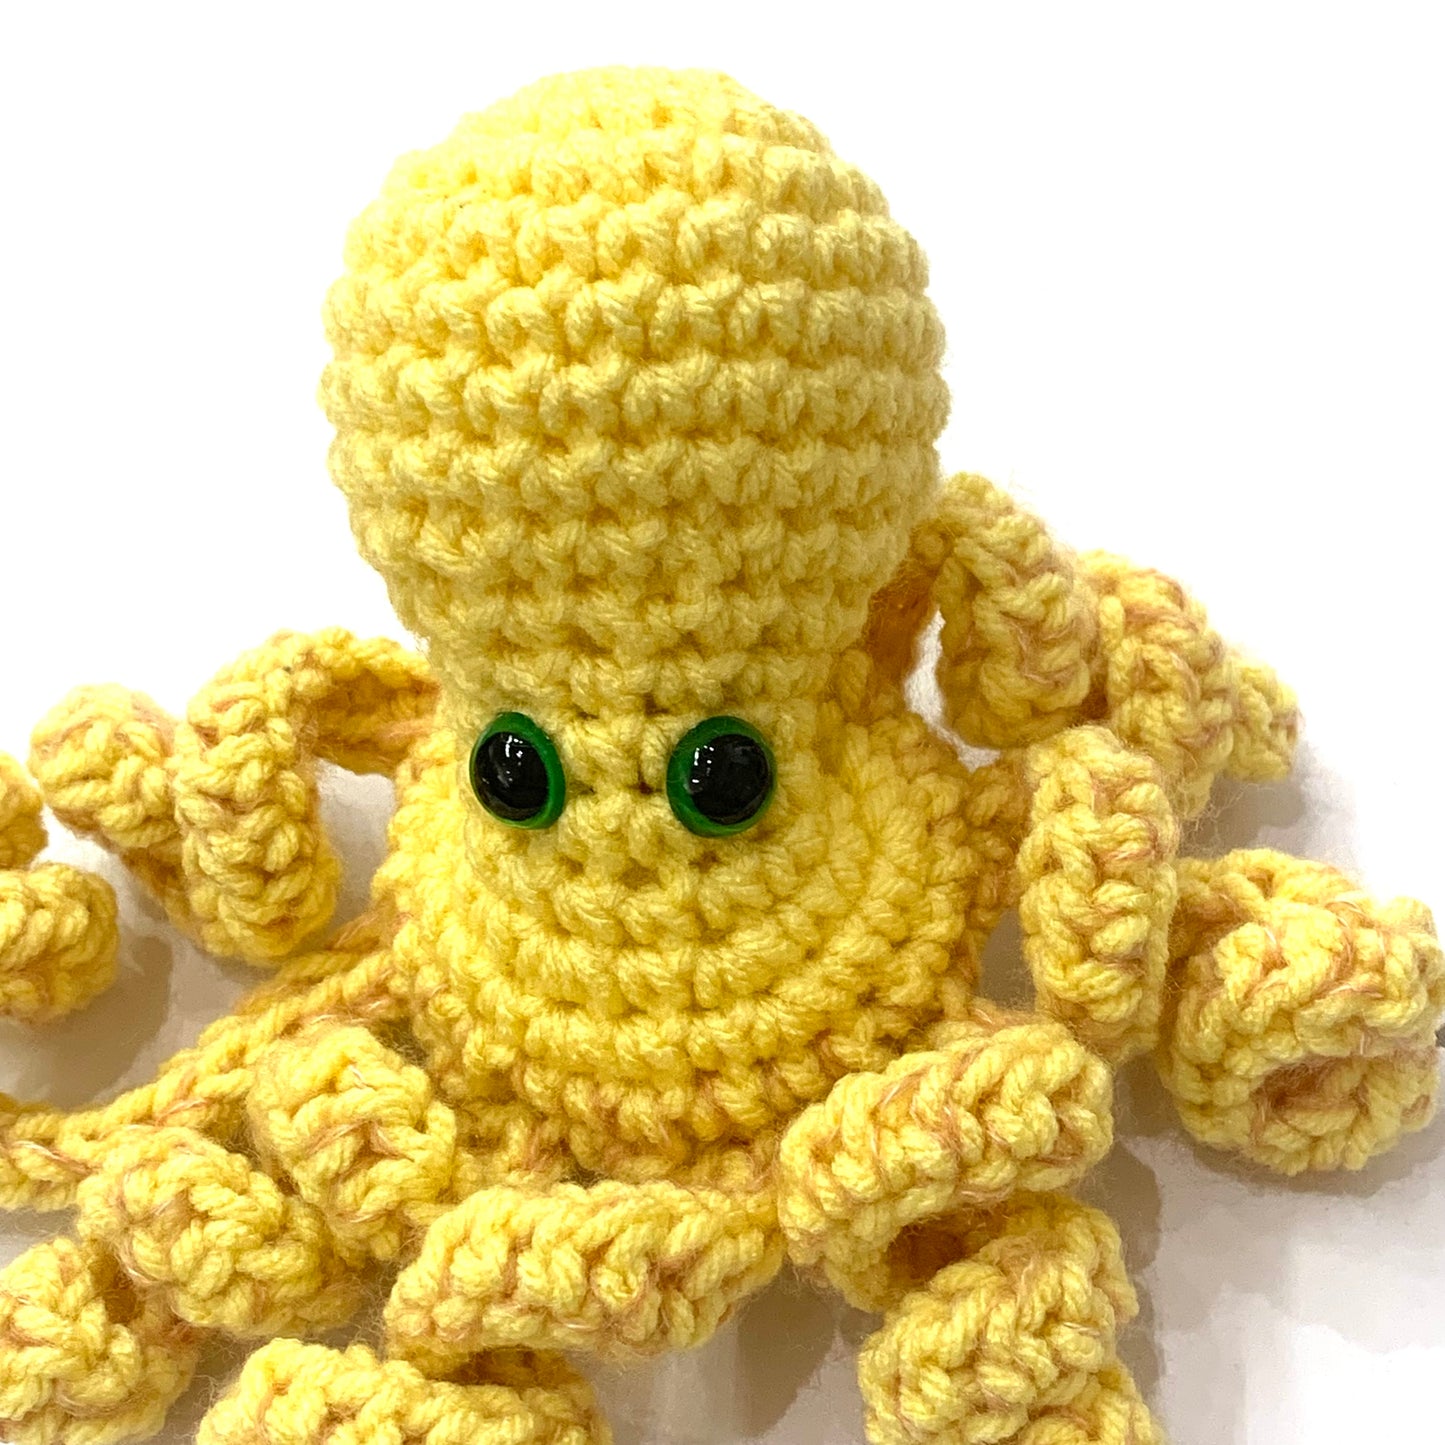 BEAKNITS- CROCHETED OCTOPUS - Yellow with Peach